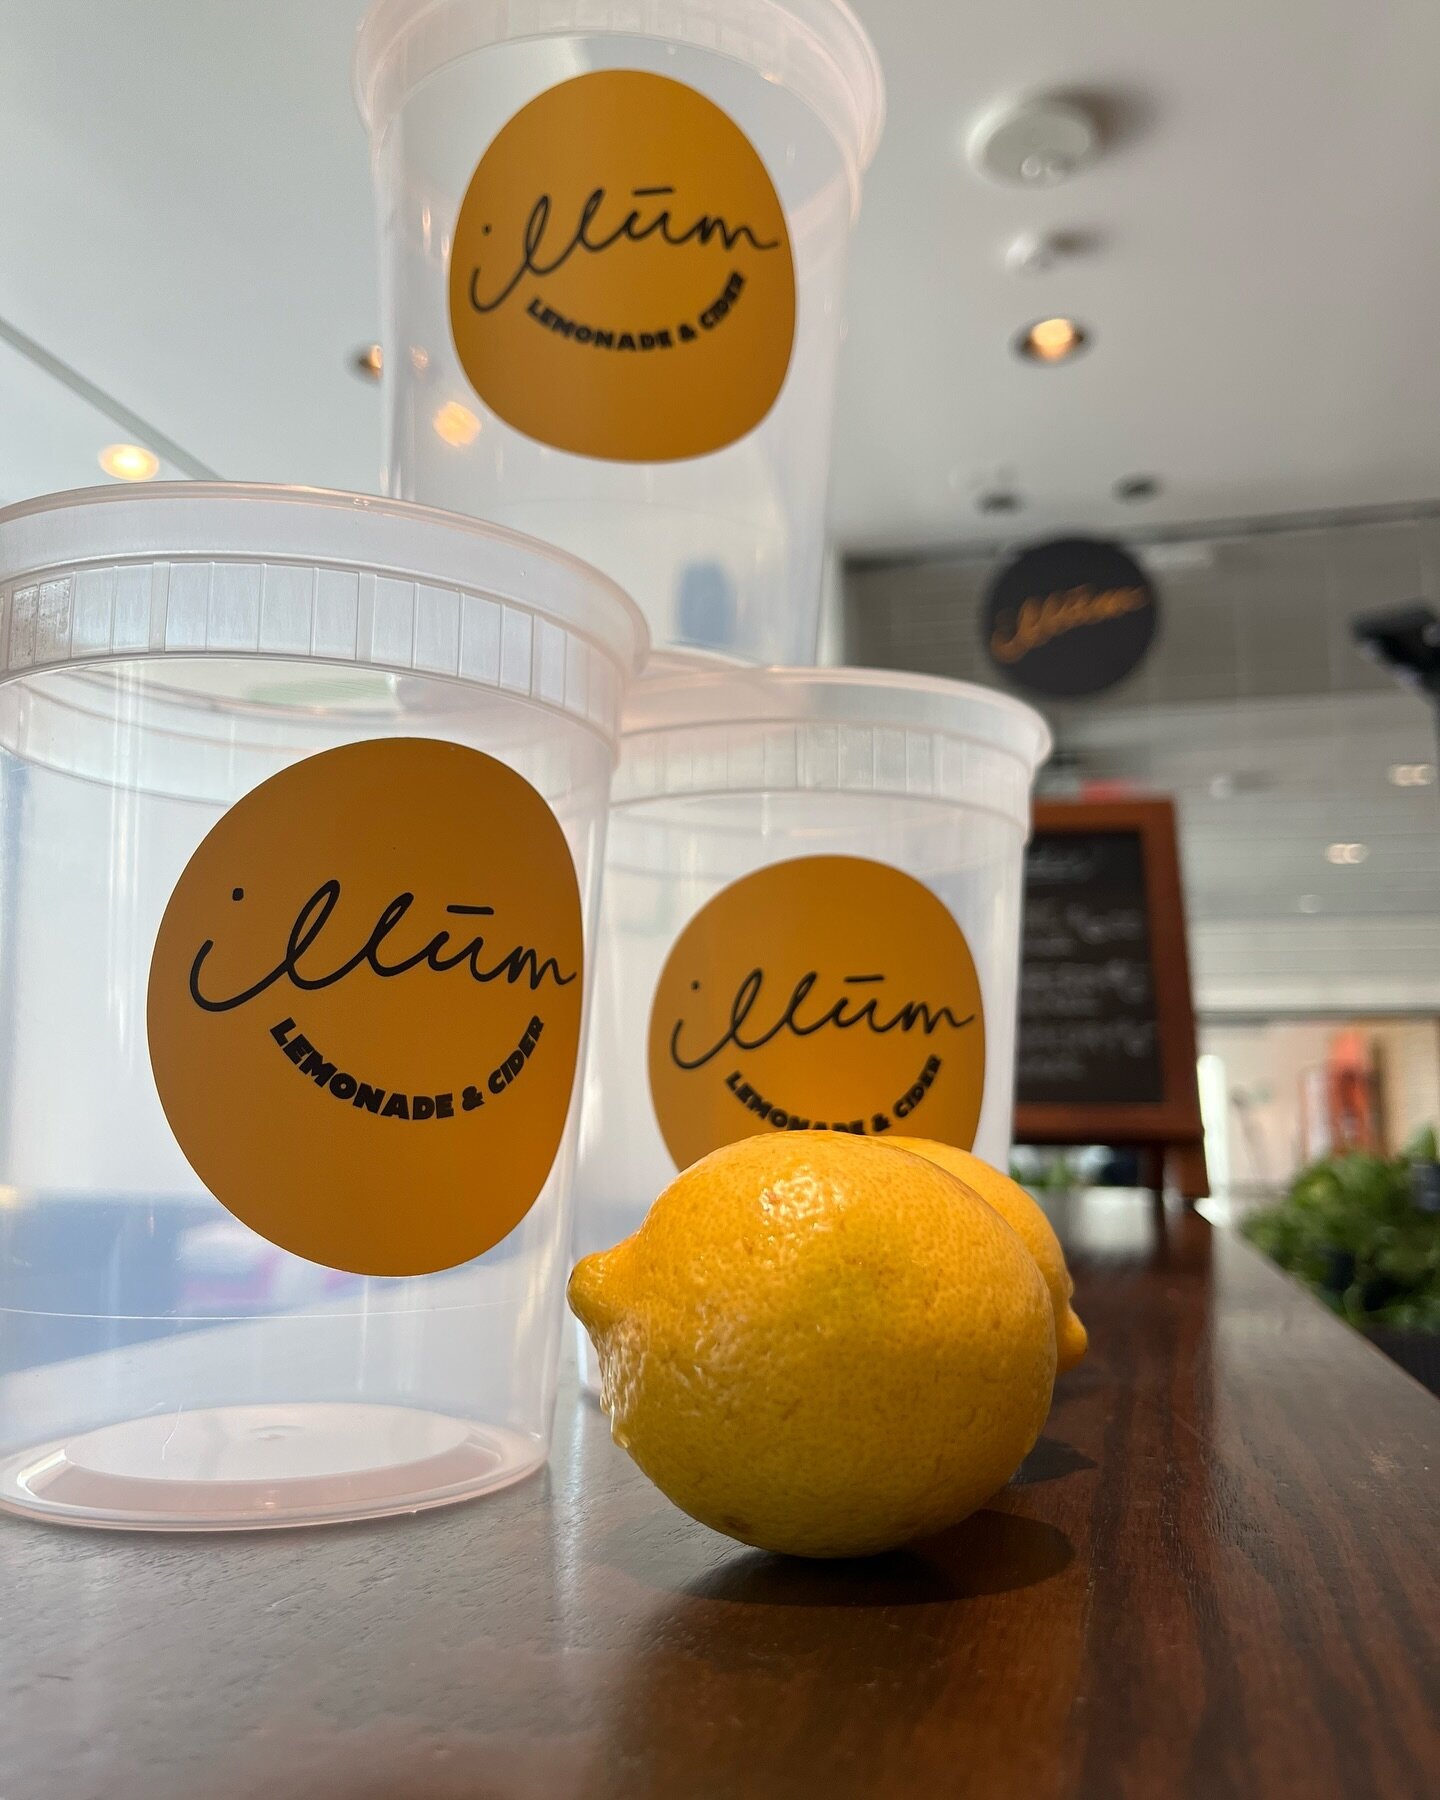 🍋 Filling my cup up with illūm! ☀️🌿 There's nothing quite like a refreshing Illum lemonade with a burst of flavor and positivity. Whether it's a sunny day or I need a little pick-me-up, their handcrafted lemonades always hit the spot. With their un